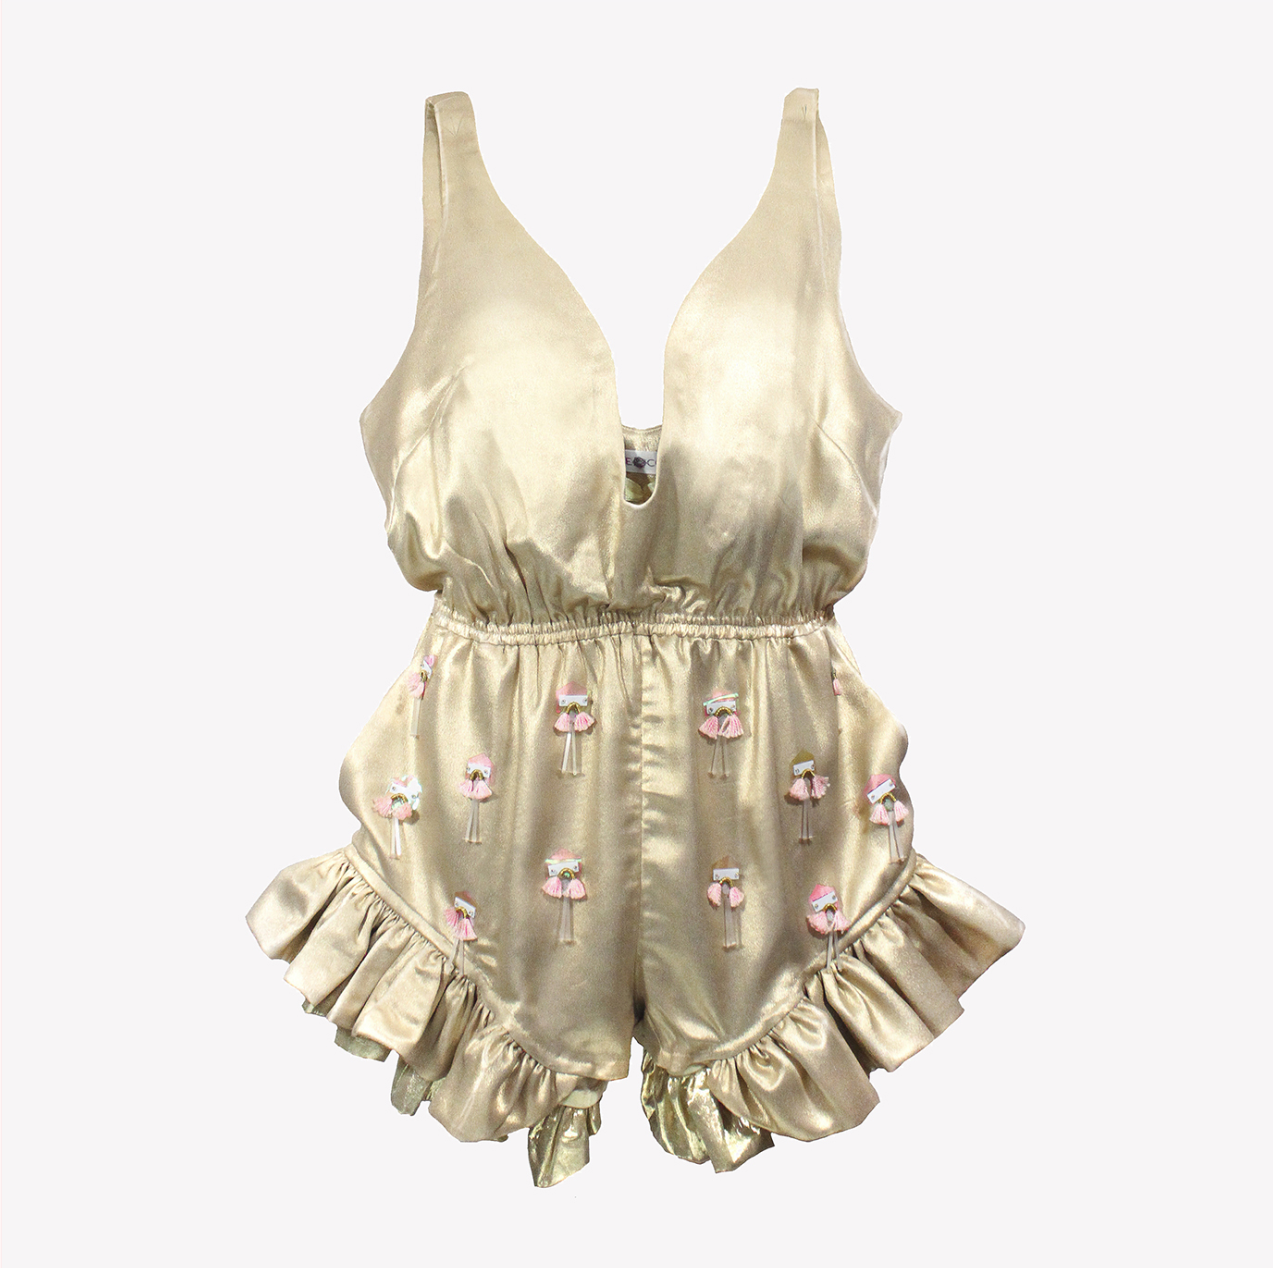 Madison - Gold playsuit with deep neckline, ruffles and tassel embroidery